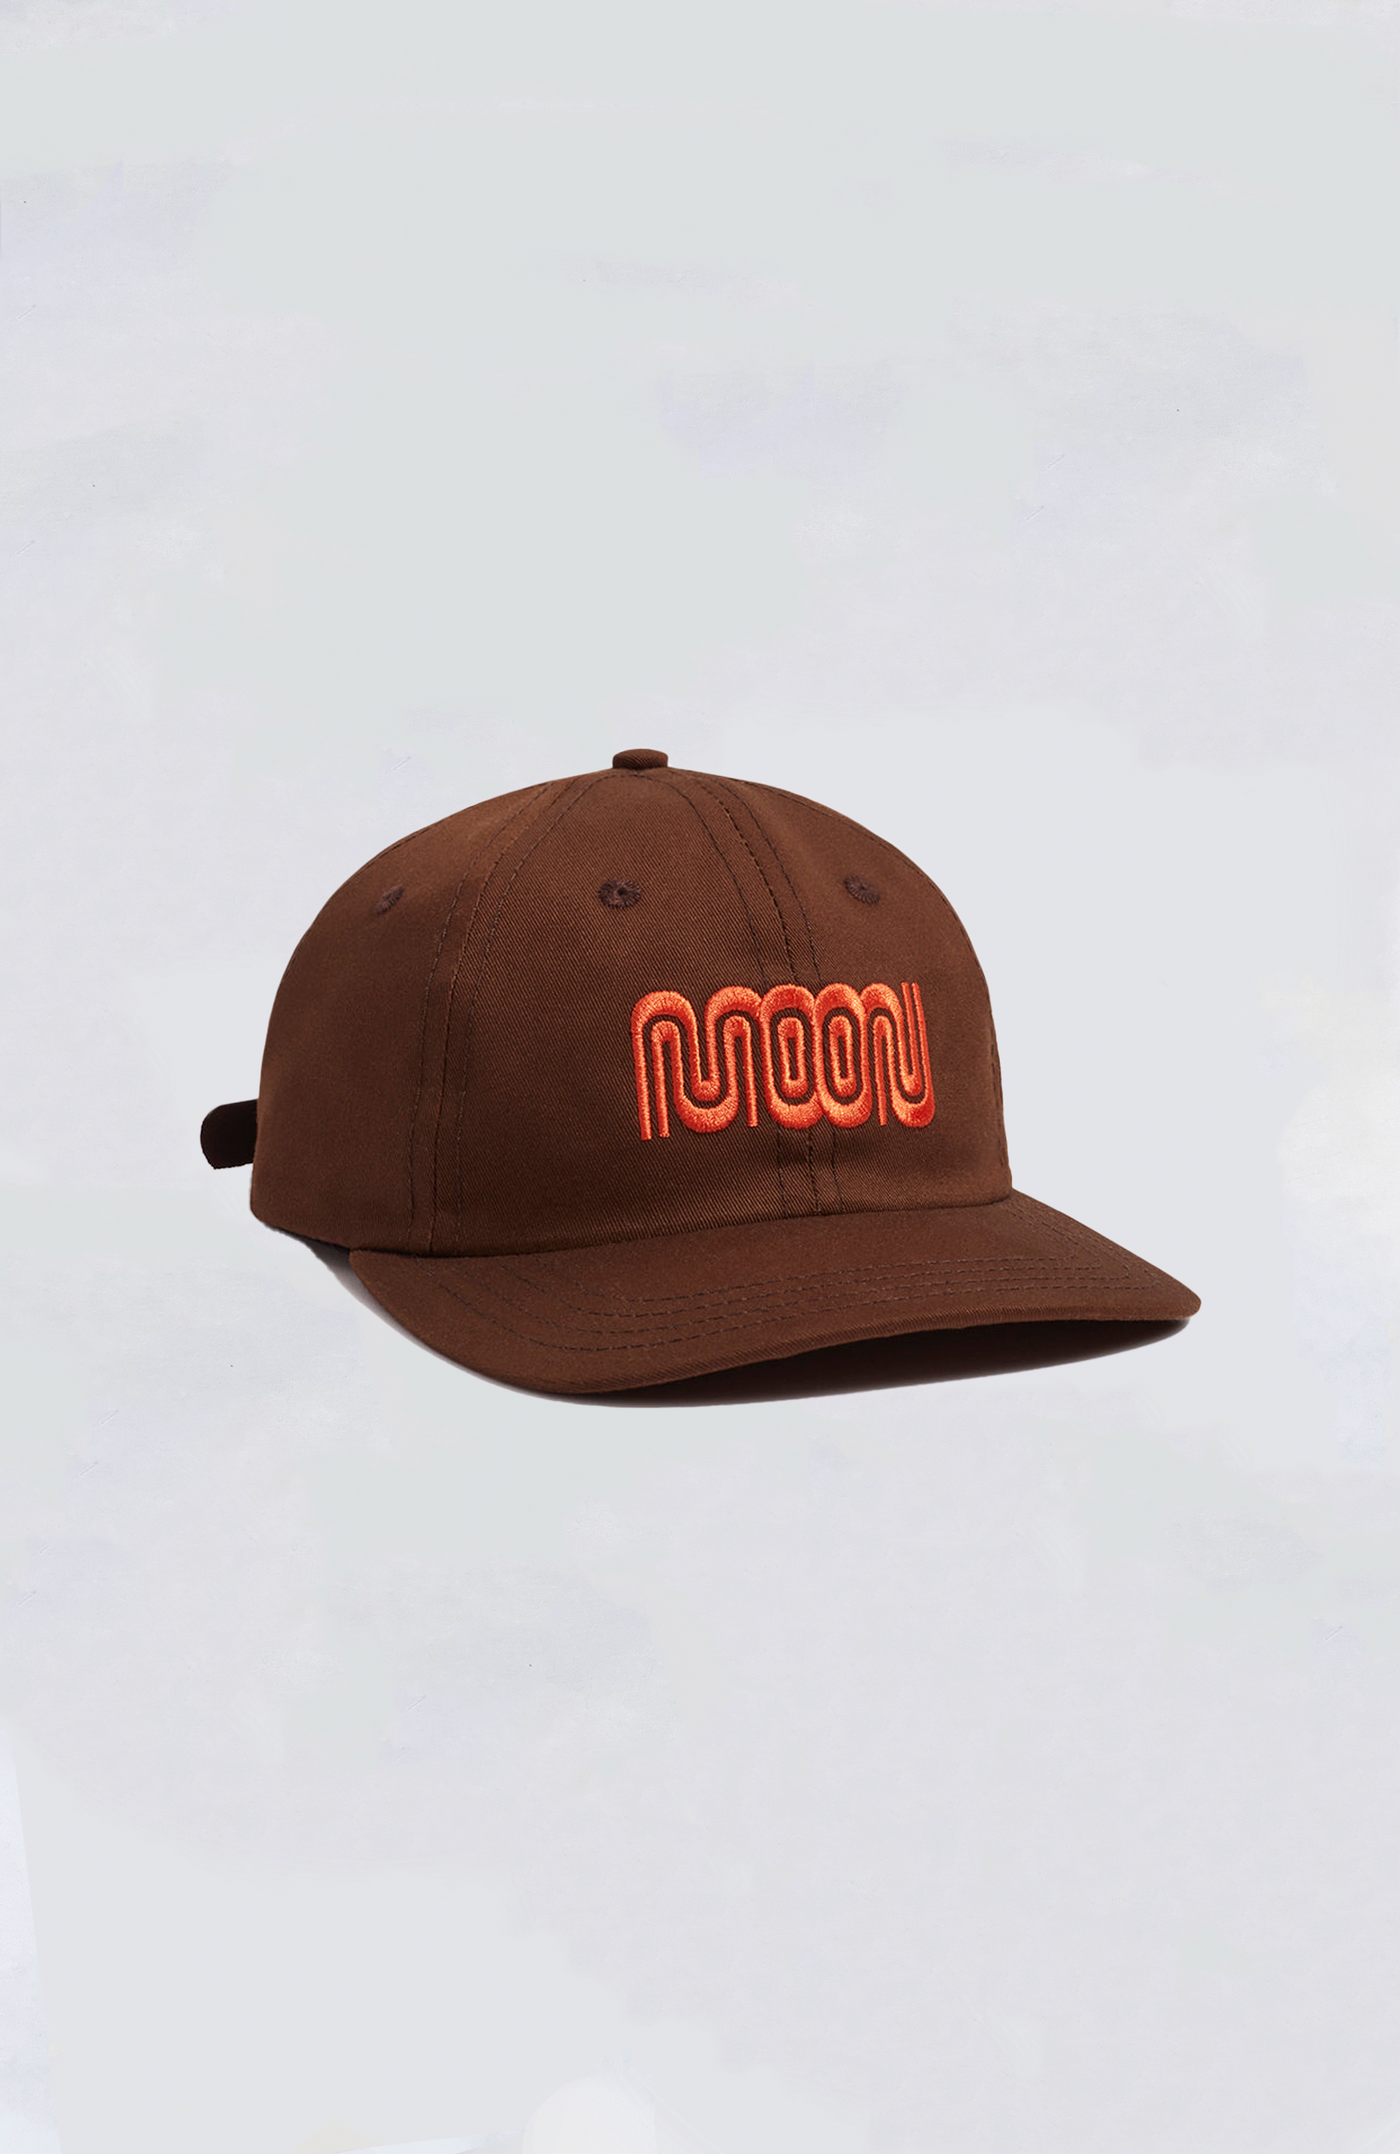 Moon Collective - Moon Bus Strapback Hat